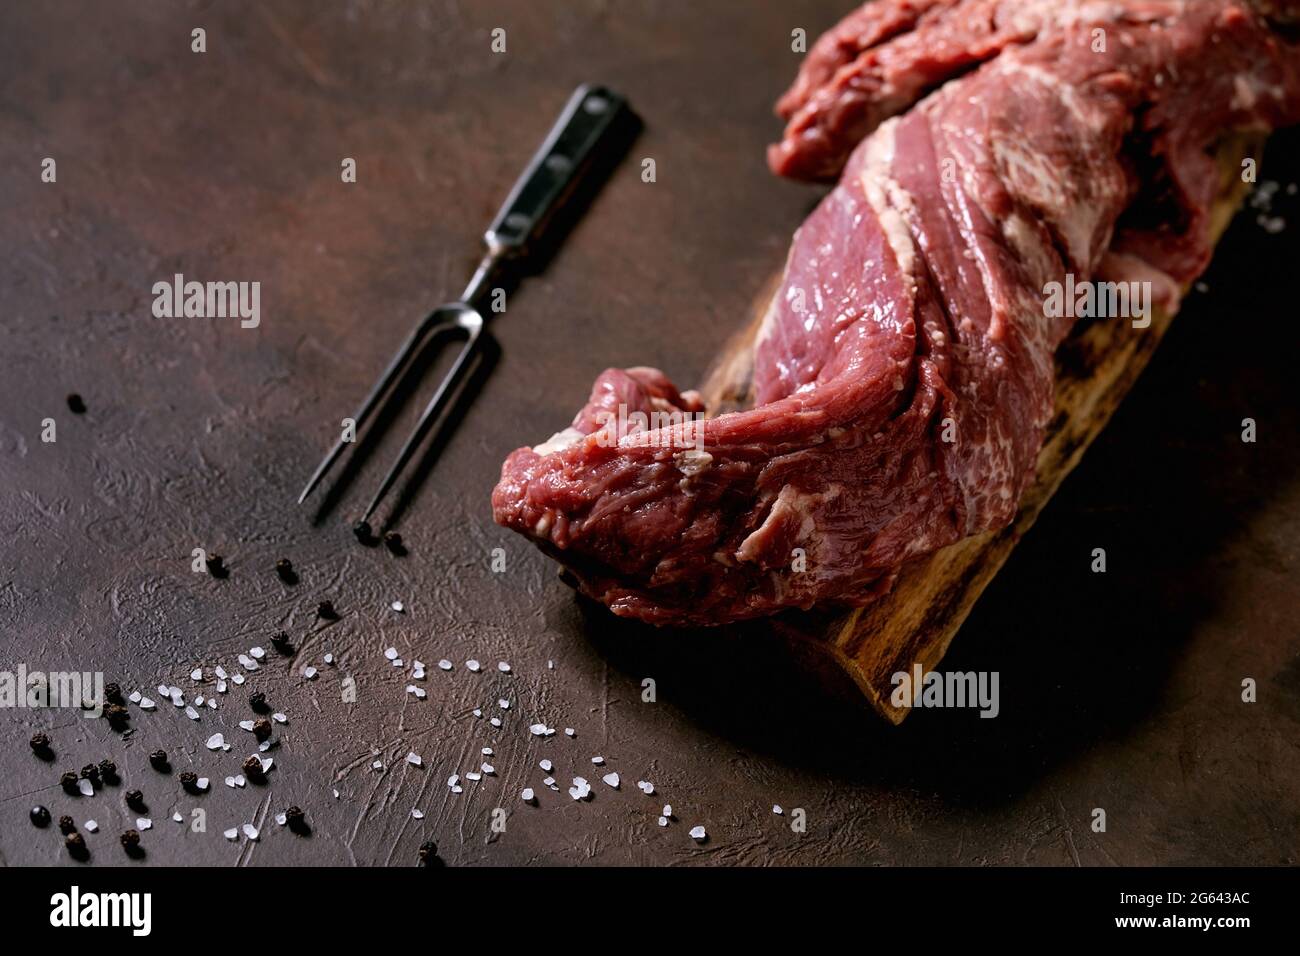 Fresh whole raw beef tenderloin meat on wooden board with metal meat fork, salt and pepper over dark brown texture background. Food cooking background Stock Photo